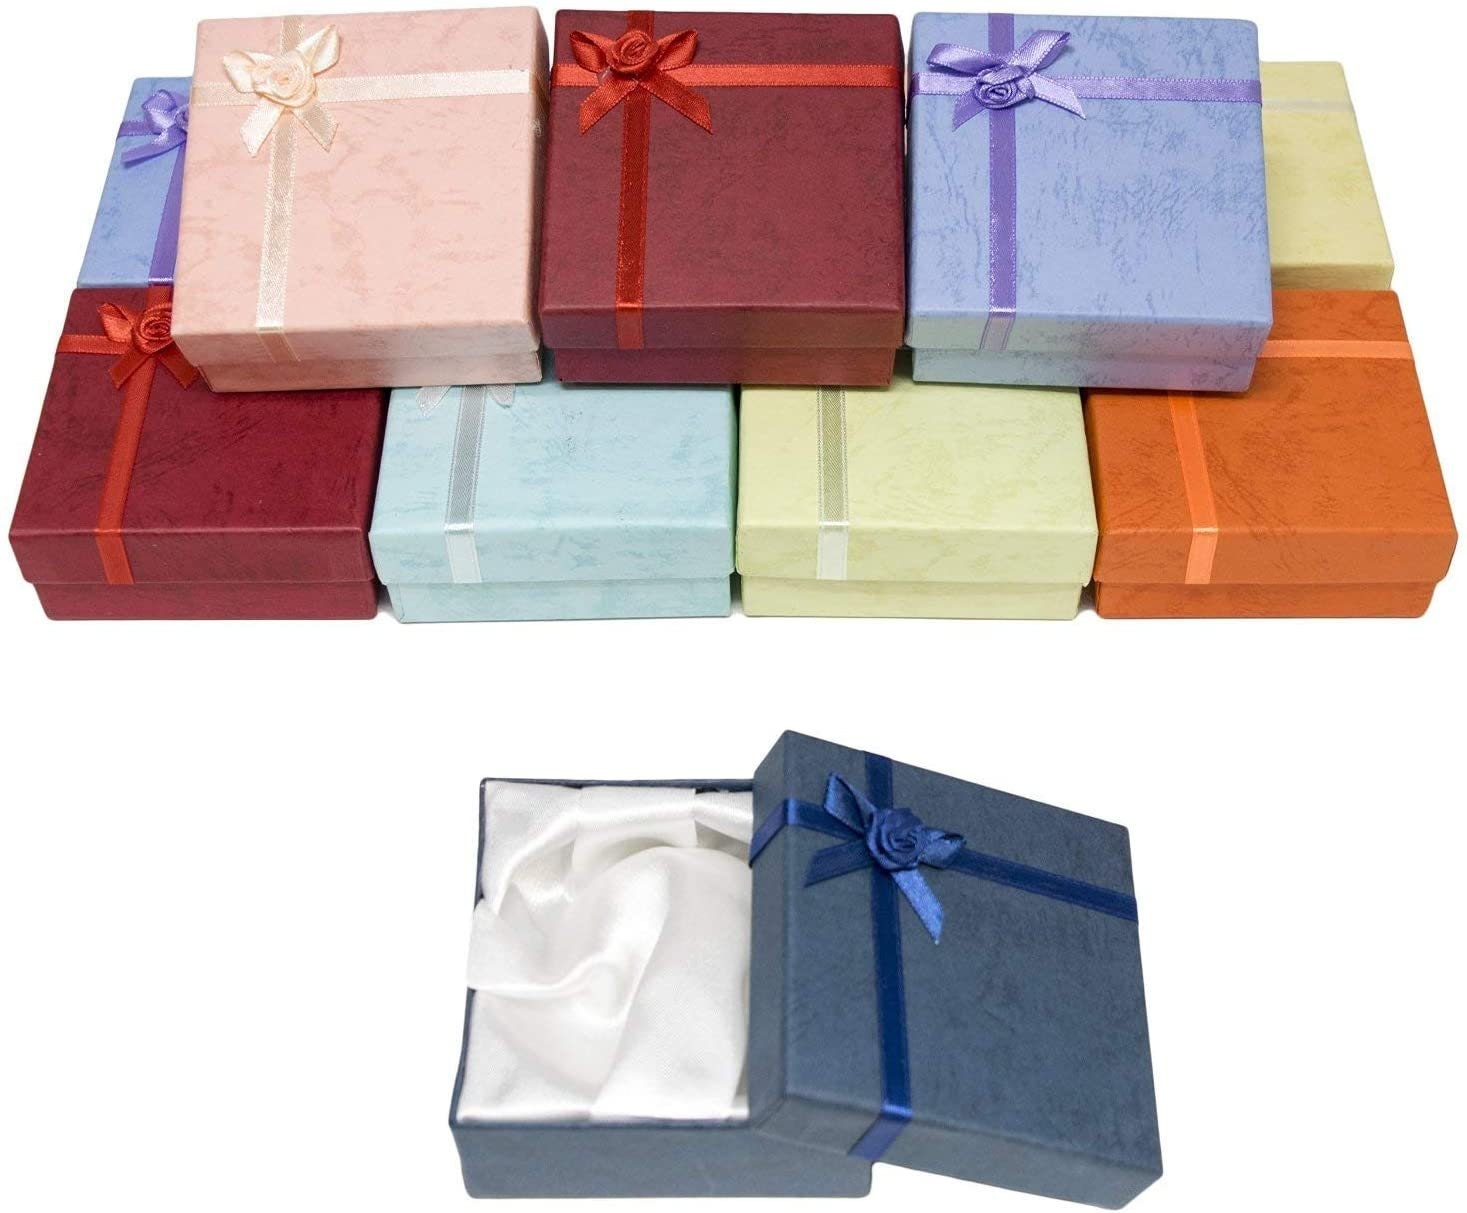 LIBOXES Gift Box 5x7x2 In - Set of 25 Gift Boxes with Lids for Presents or  Mailing - Small Shipping, Party Favor, or Gift Boxes Bulk - 25 Thank You